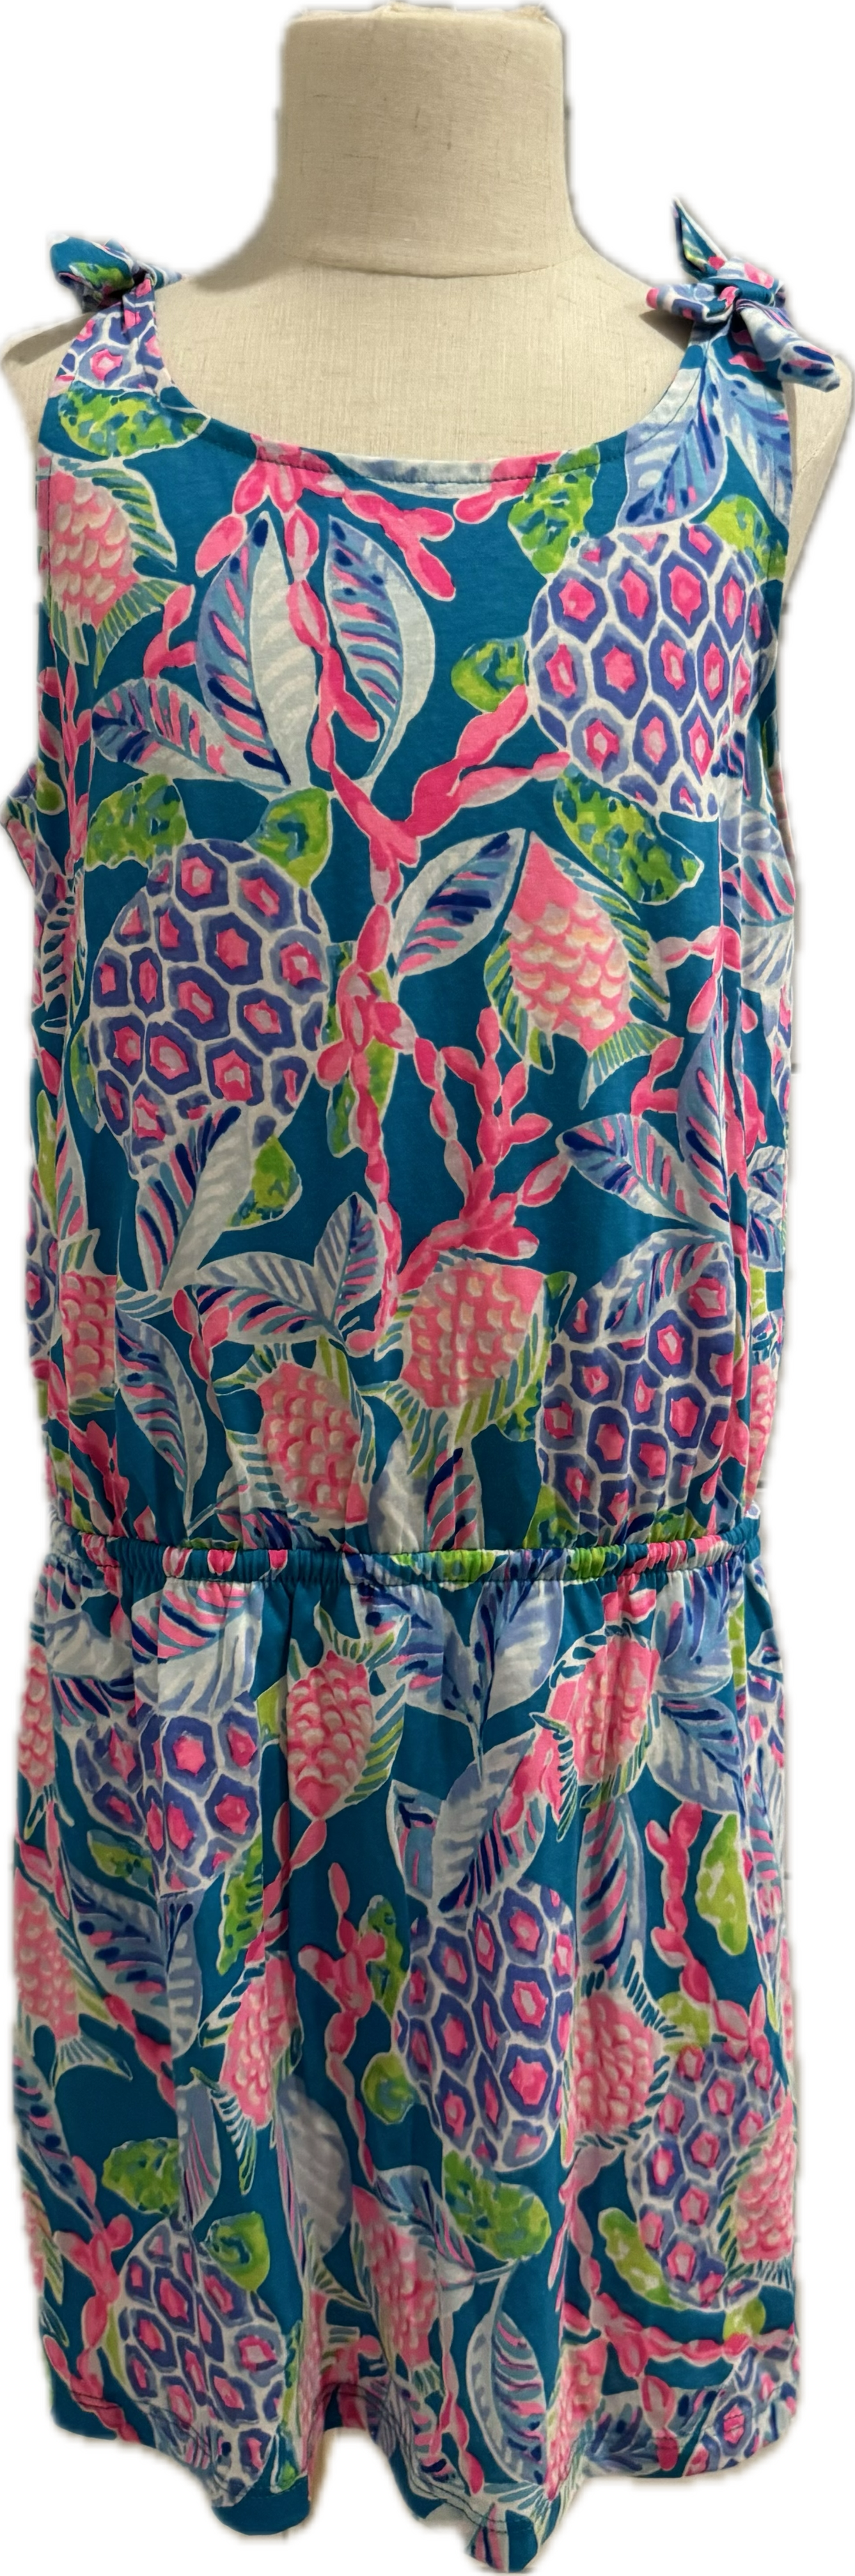 Lilly Pulitzer NWT Romper, Teal Multi Girls Size L (8/10)